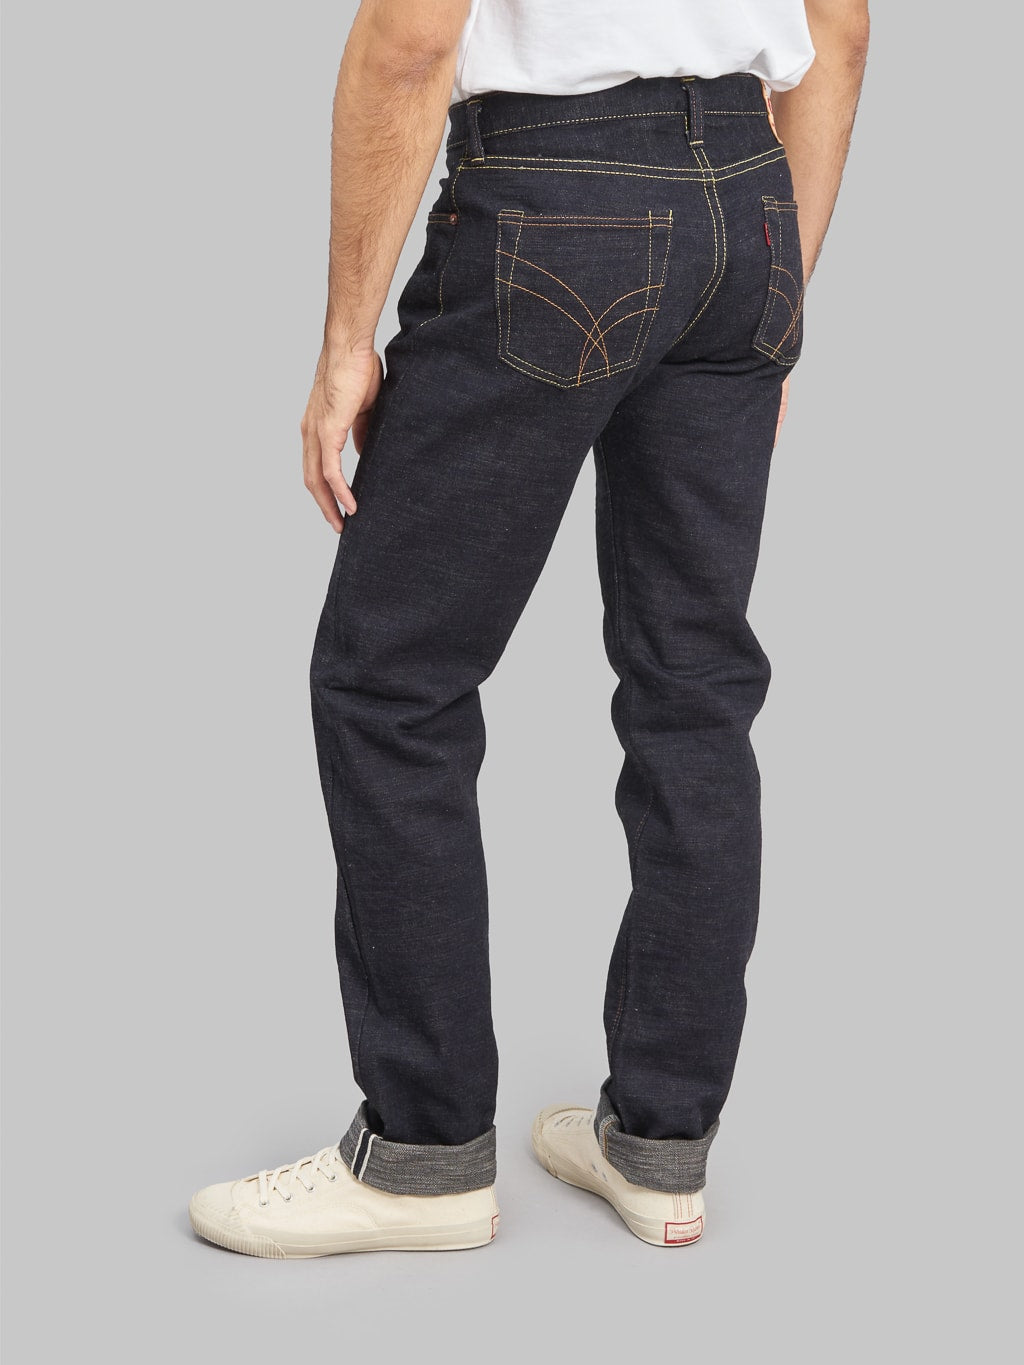 The Strike Gold 5104 Slub Grey Weft Straight Tapered Jeans fit